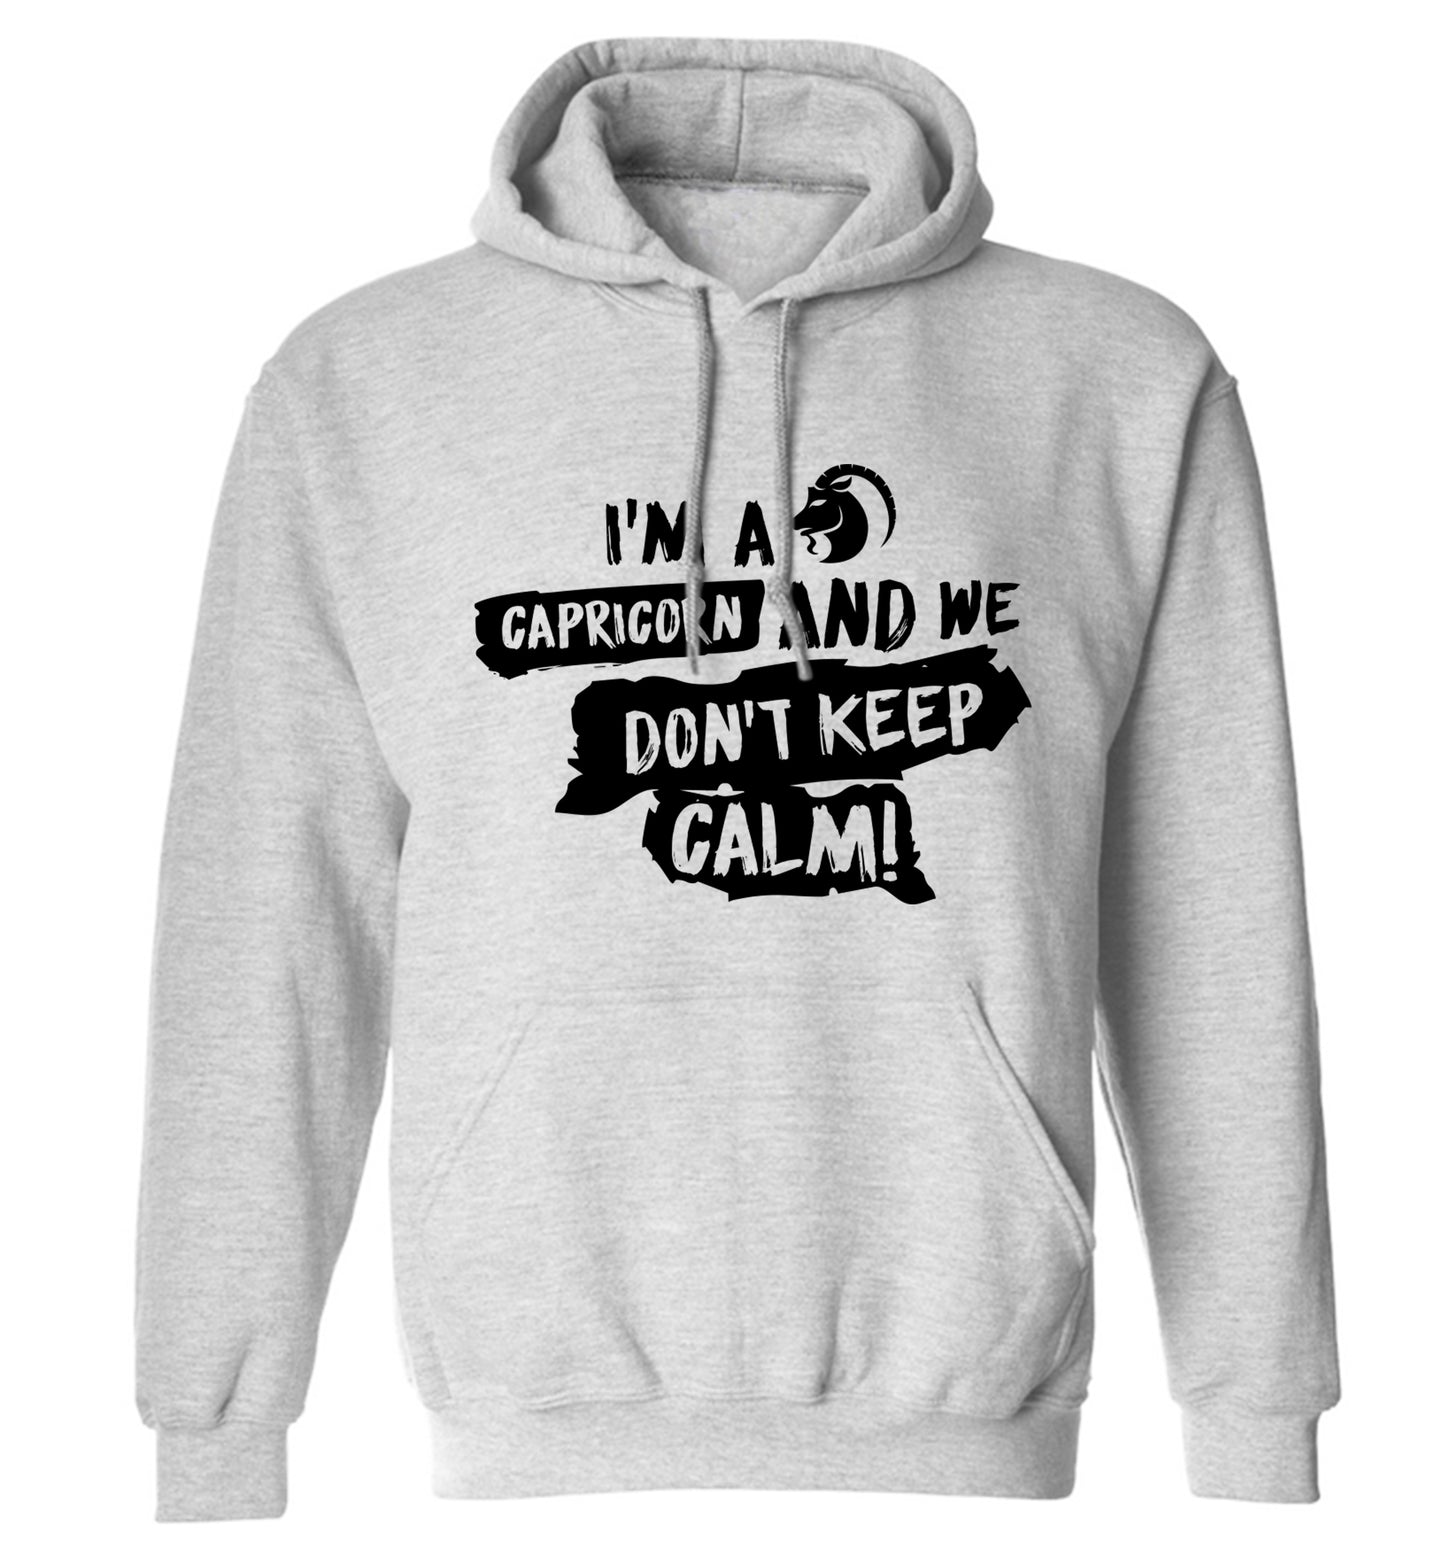 I'm a capricorn and we don't keep calm adults unisex grey hoodie 2XL